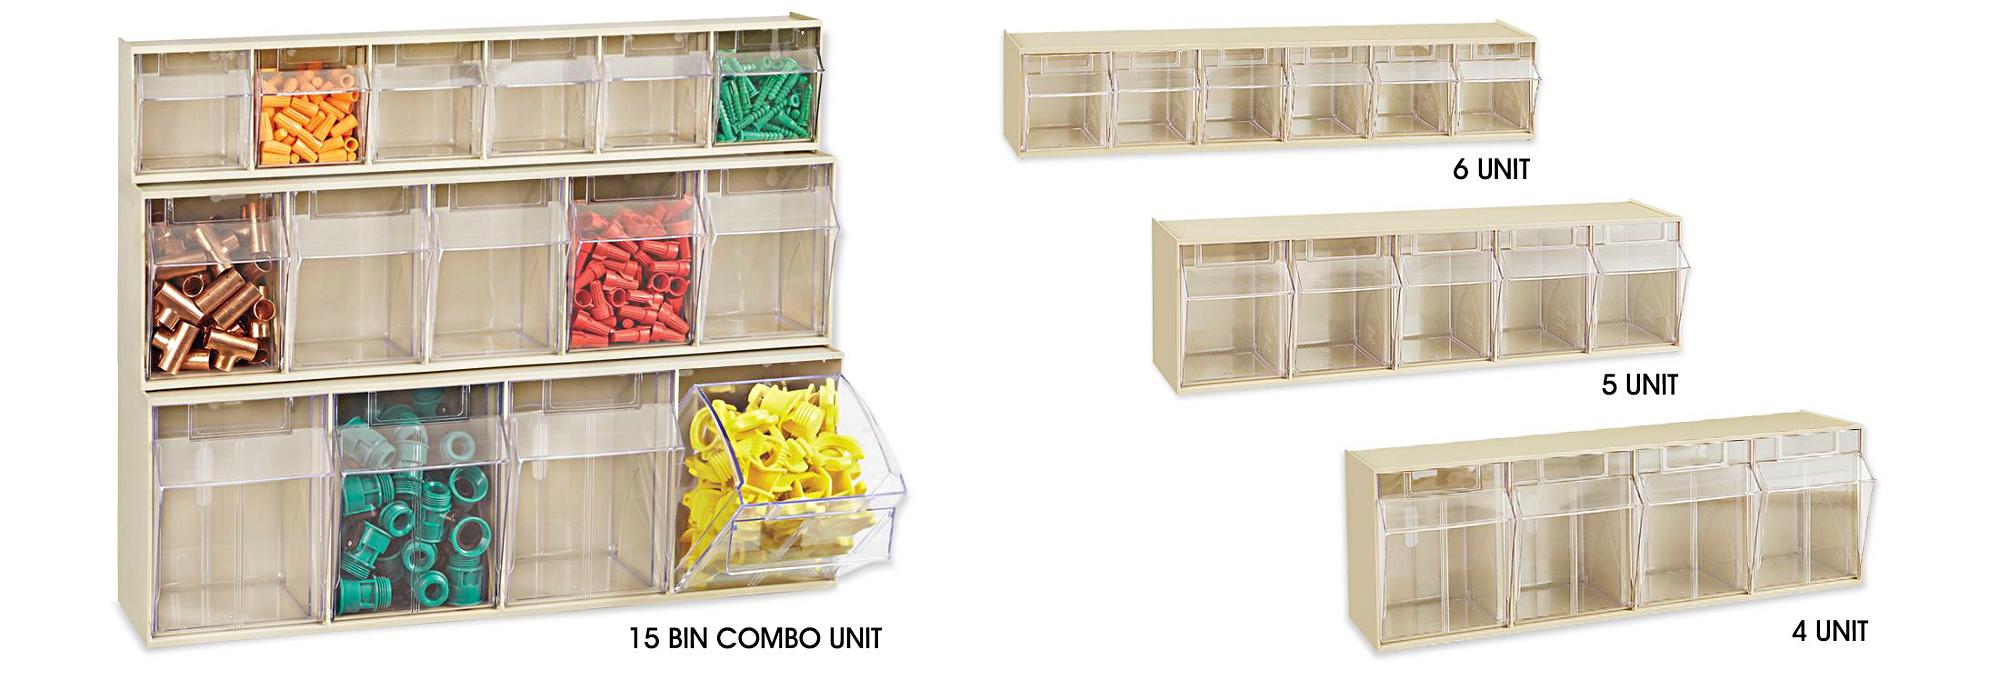 Tip-Out Bins